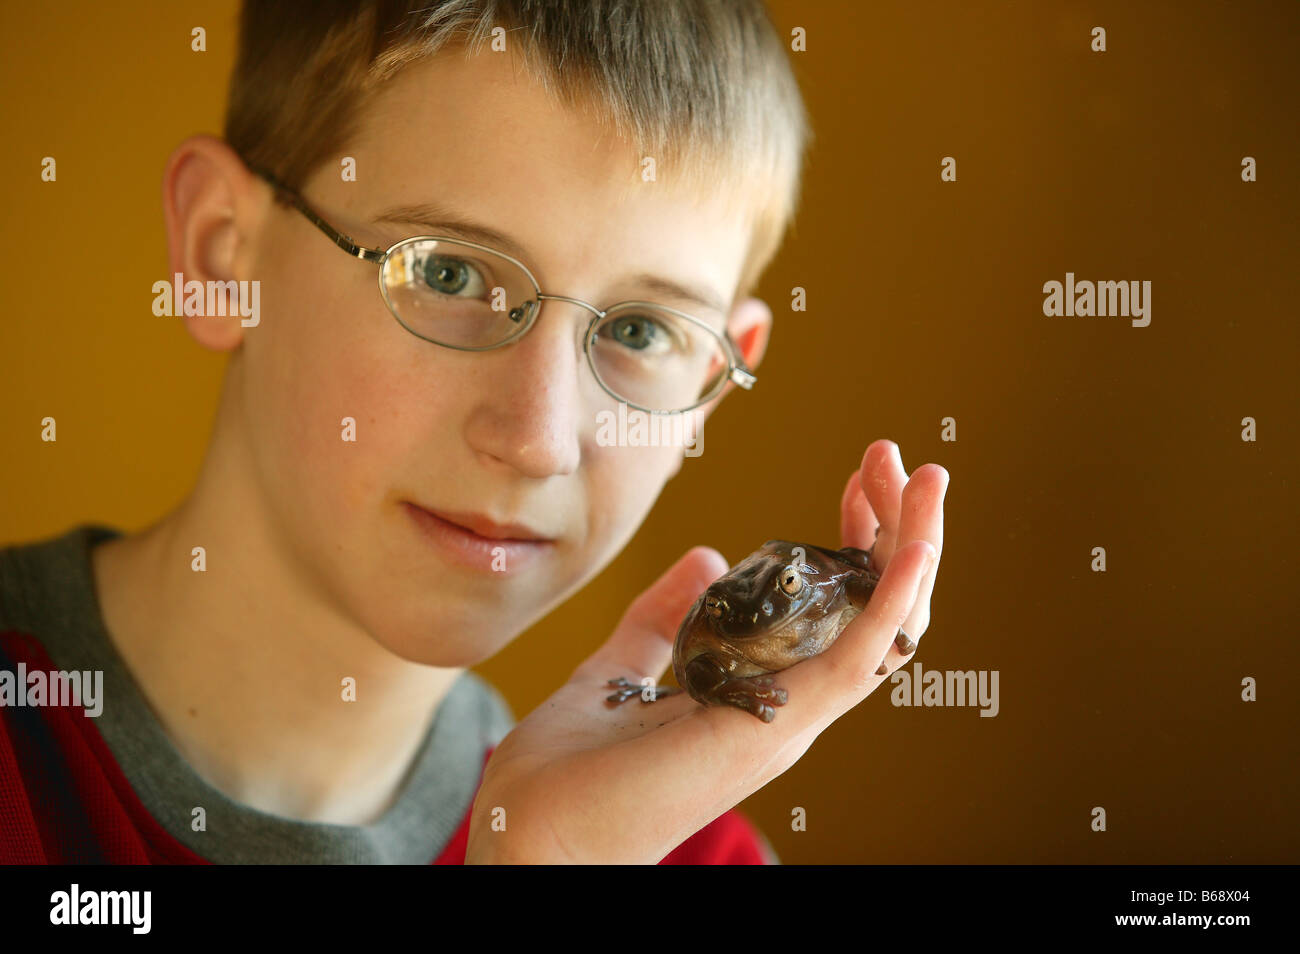 Boy with Pet Tropical Frog Stock Photo